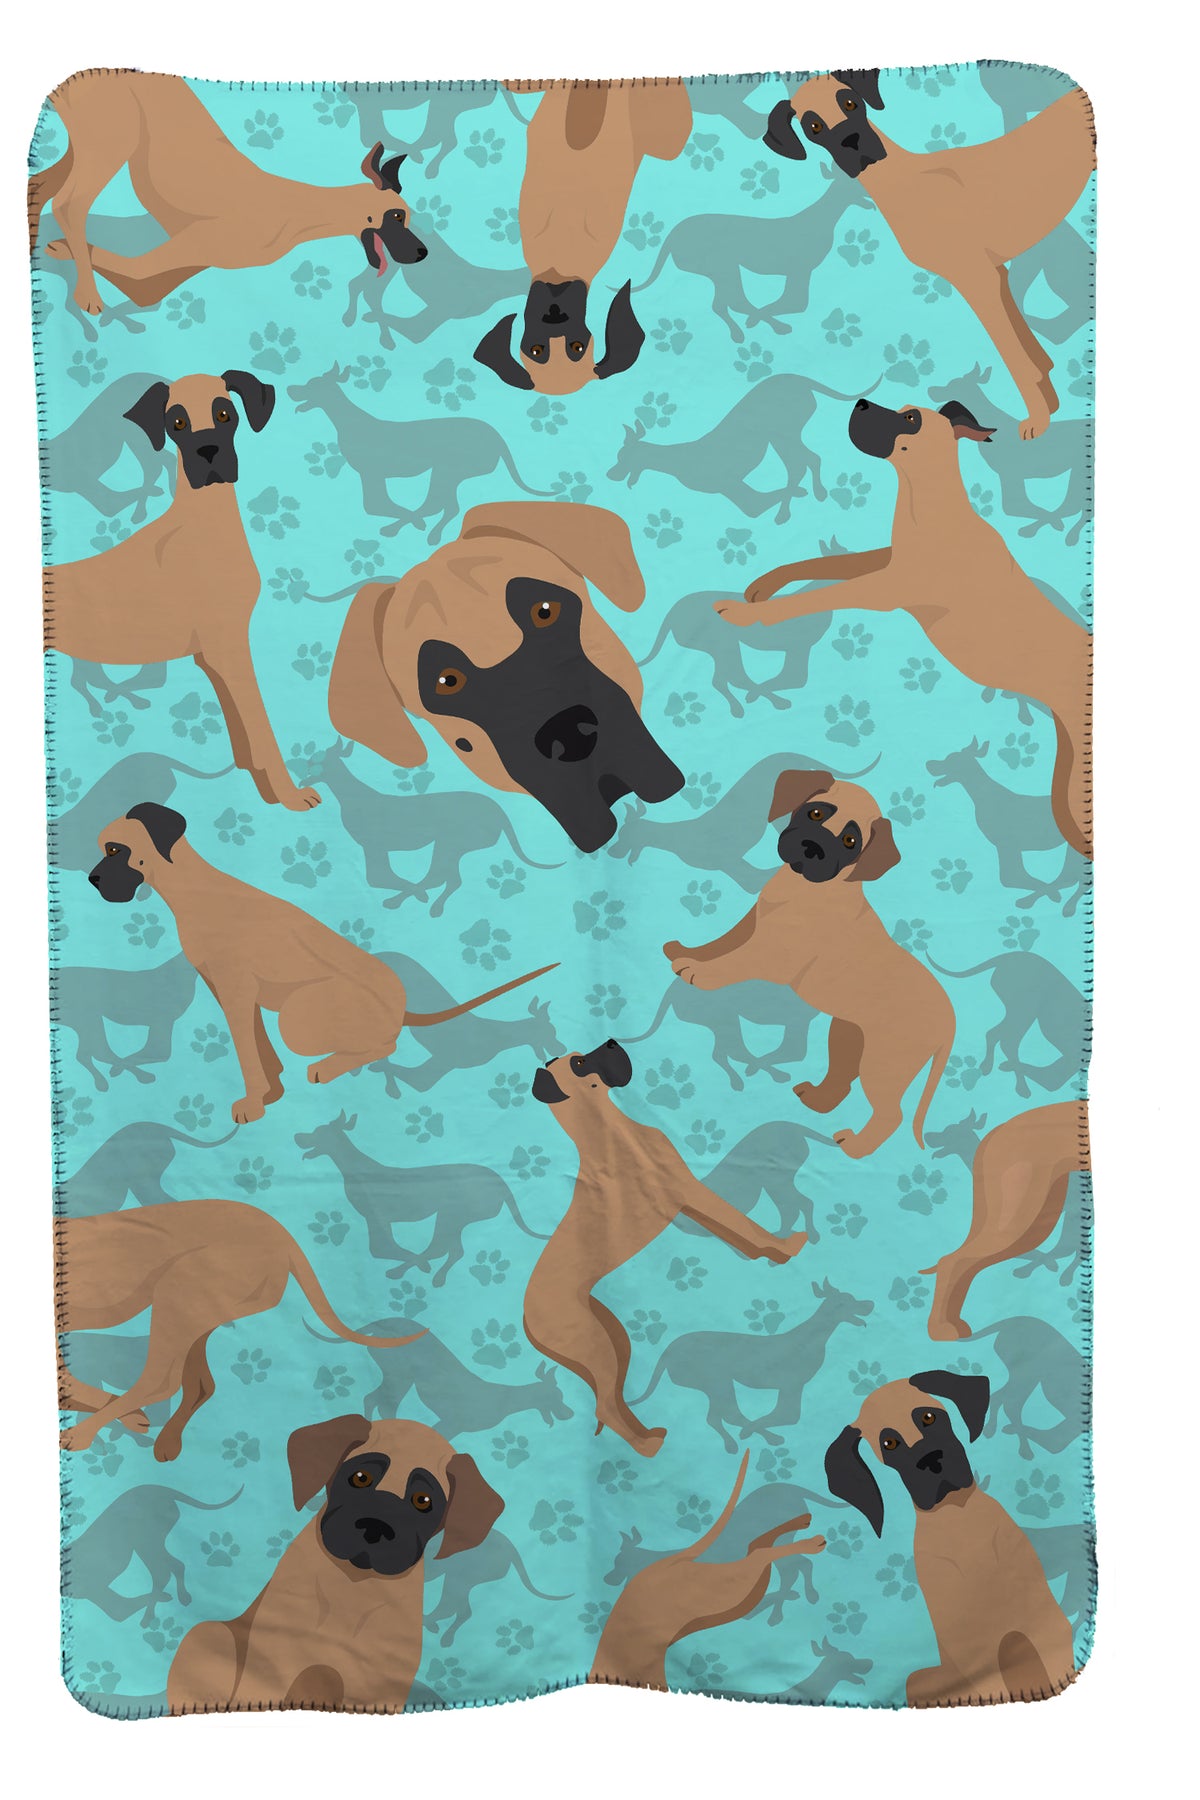 Buy this Fawn Great Dane Soft Travel Blanket with Bag